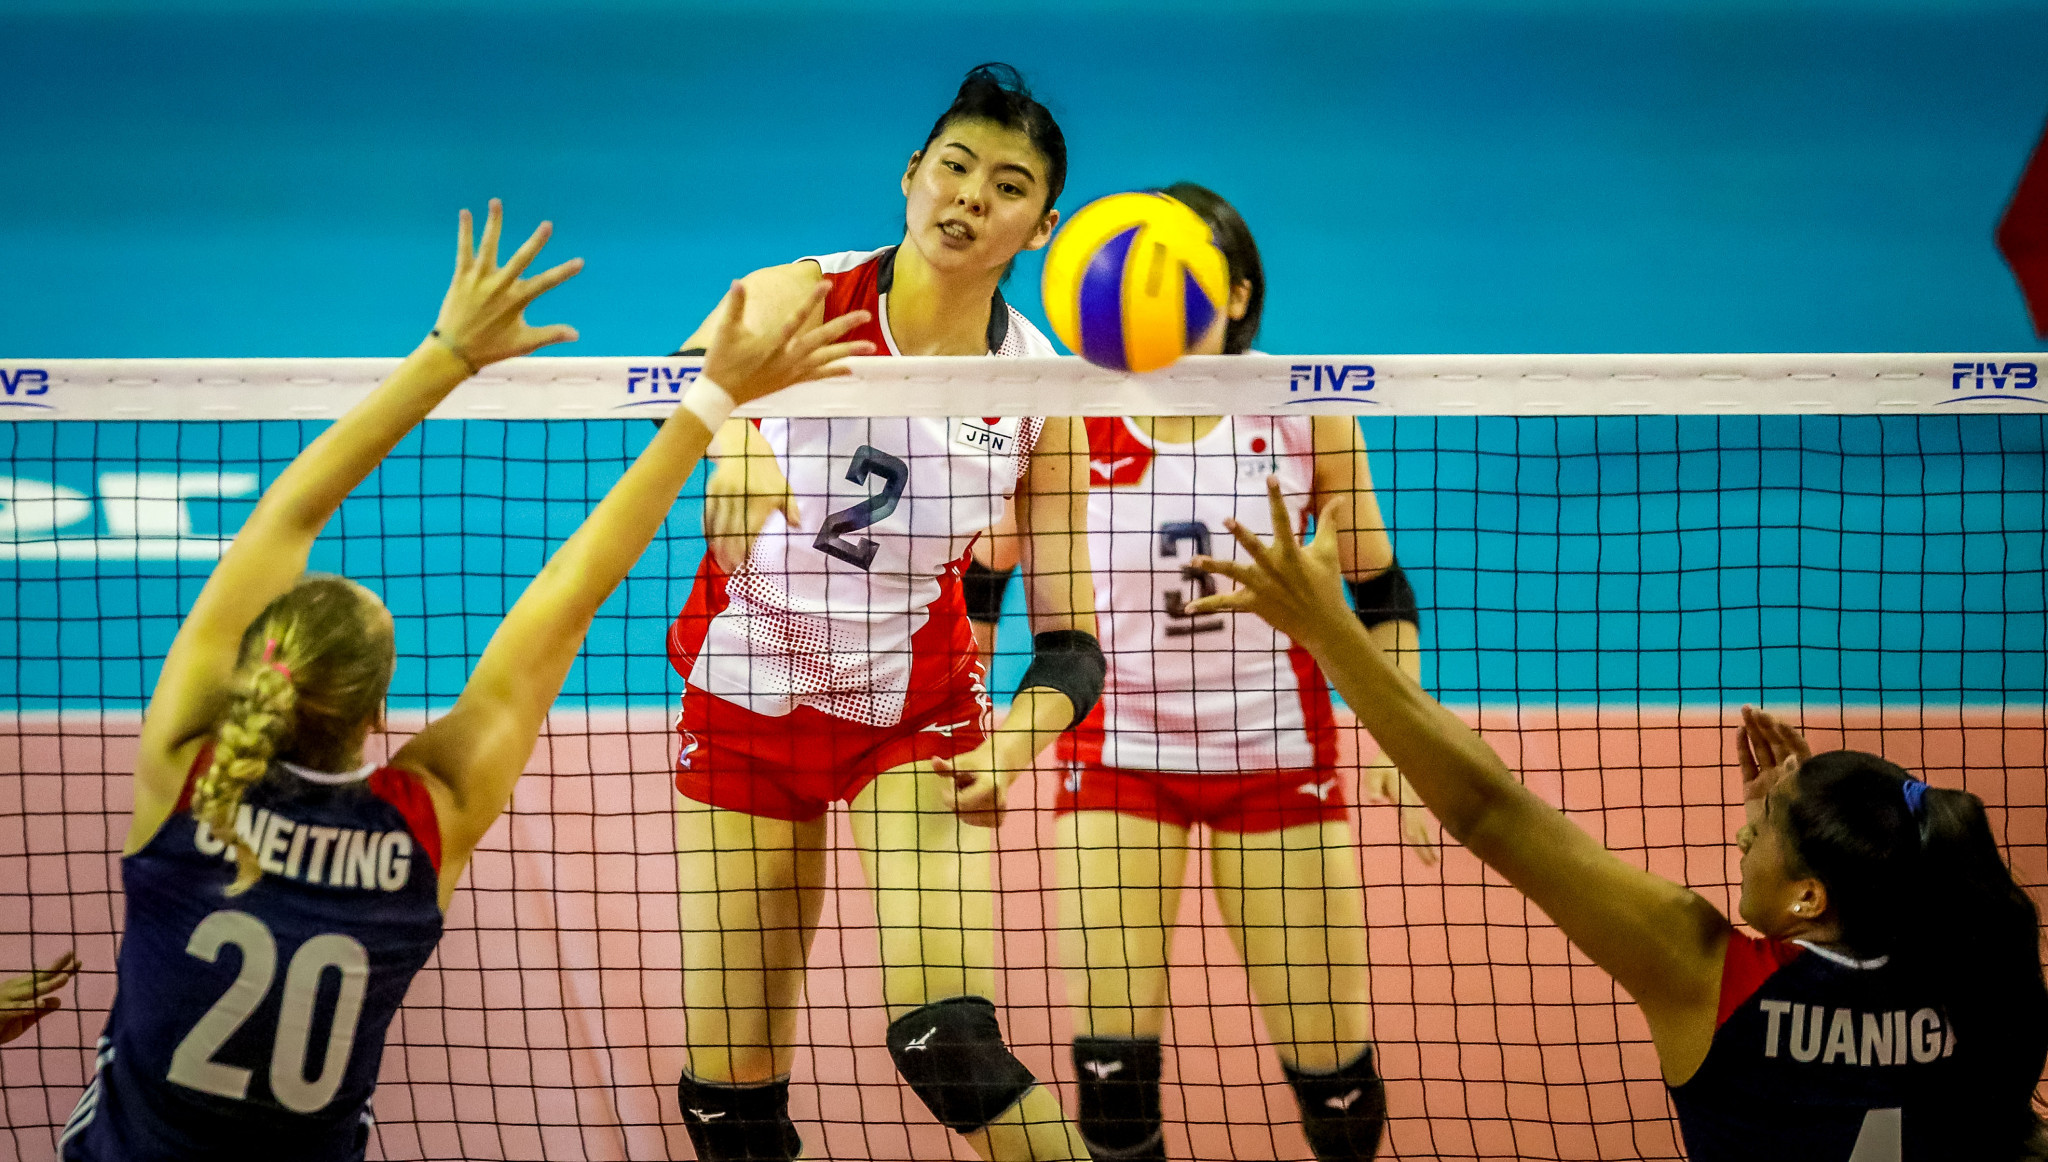 Japan remain undefeated at the tournament in Mexico ©FIVB